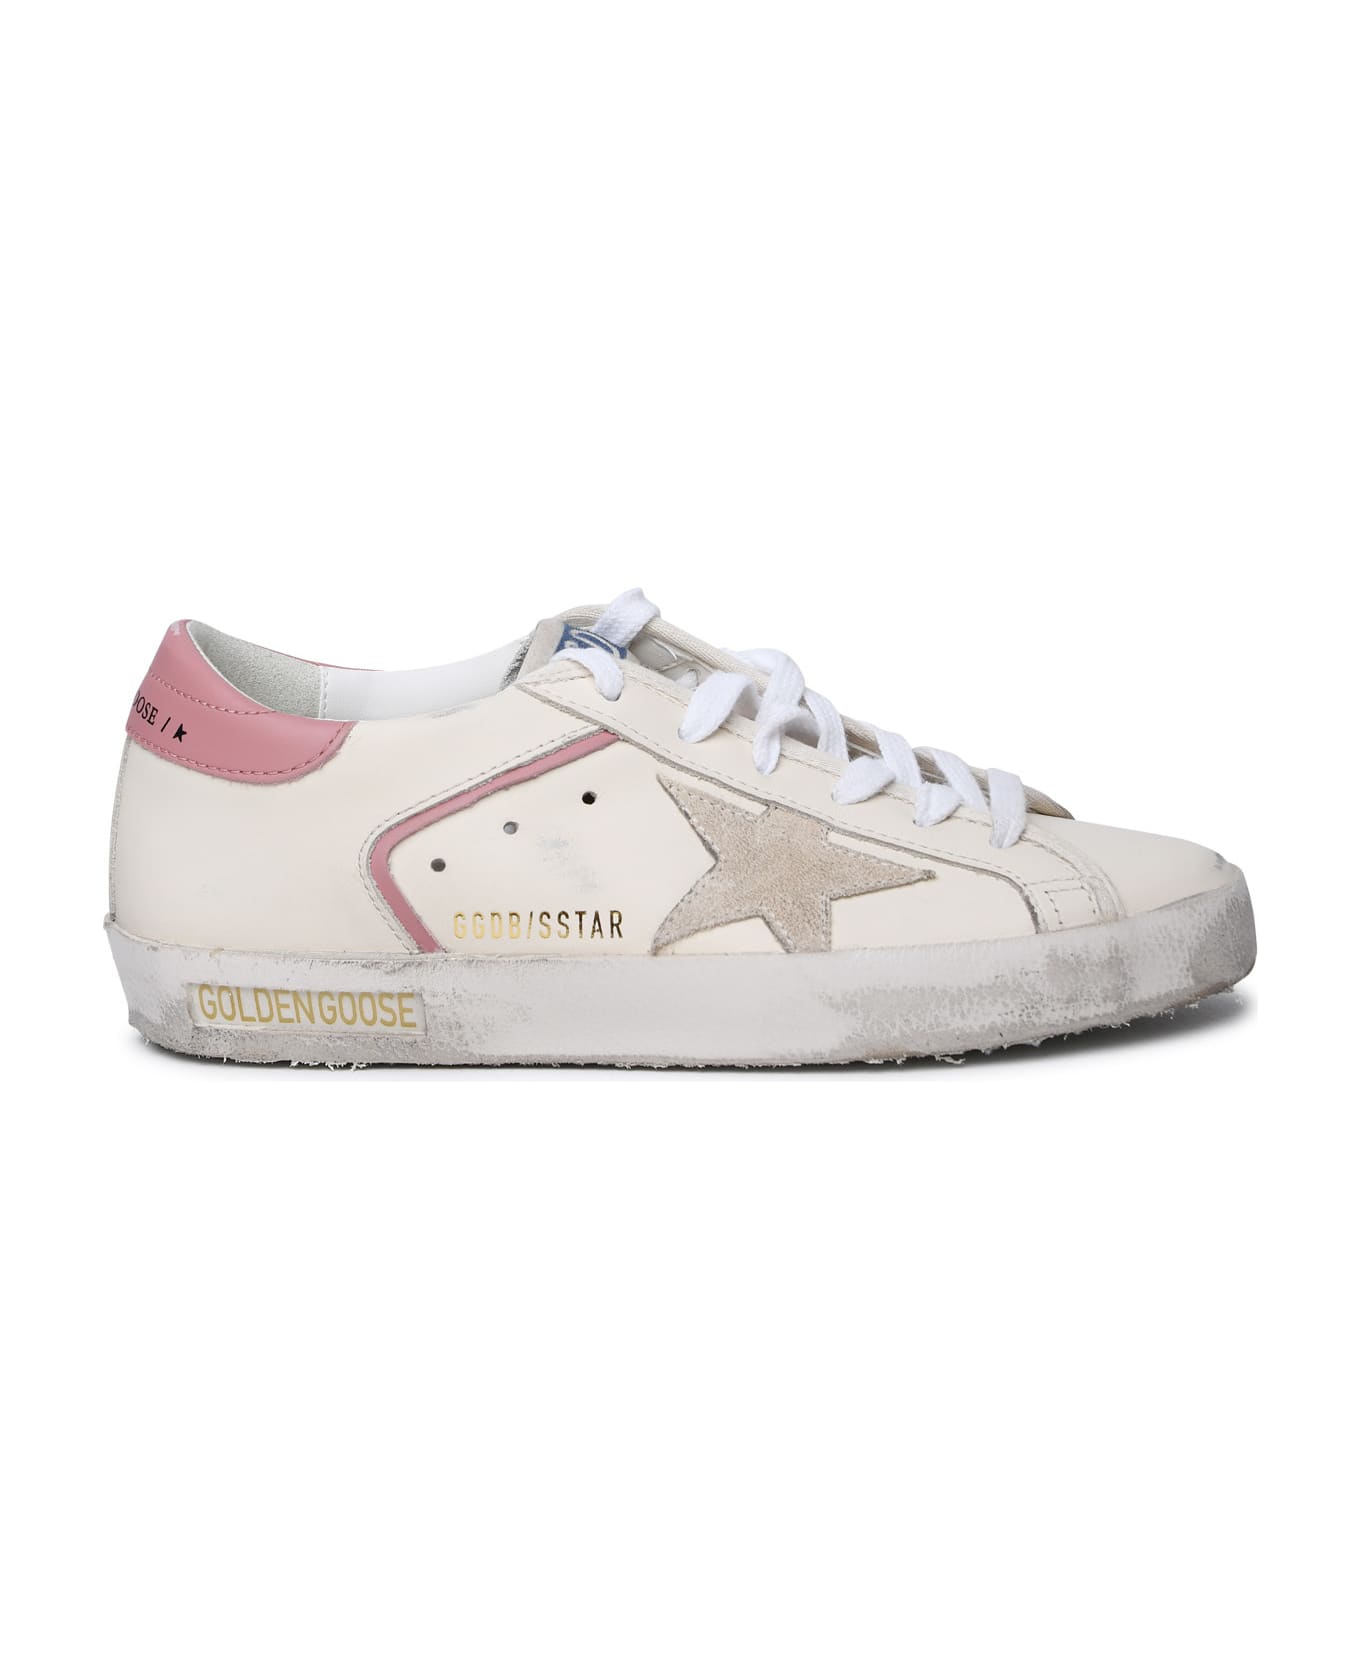 Golden Goose Super-star Leather Upper Suede Star Leather Heel Sneakers - Cream Seedpearl Ash Rose